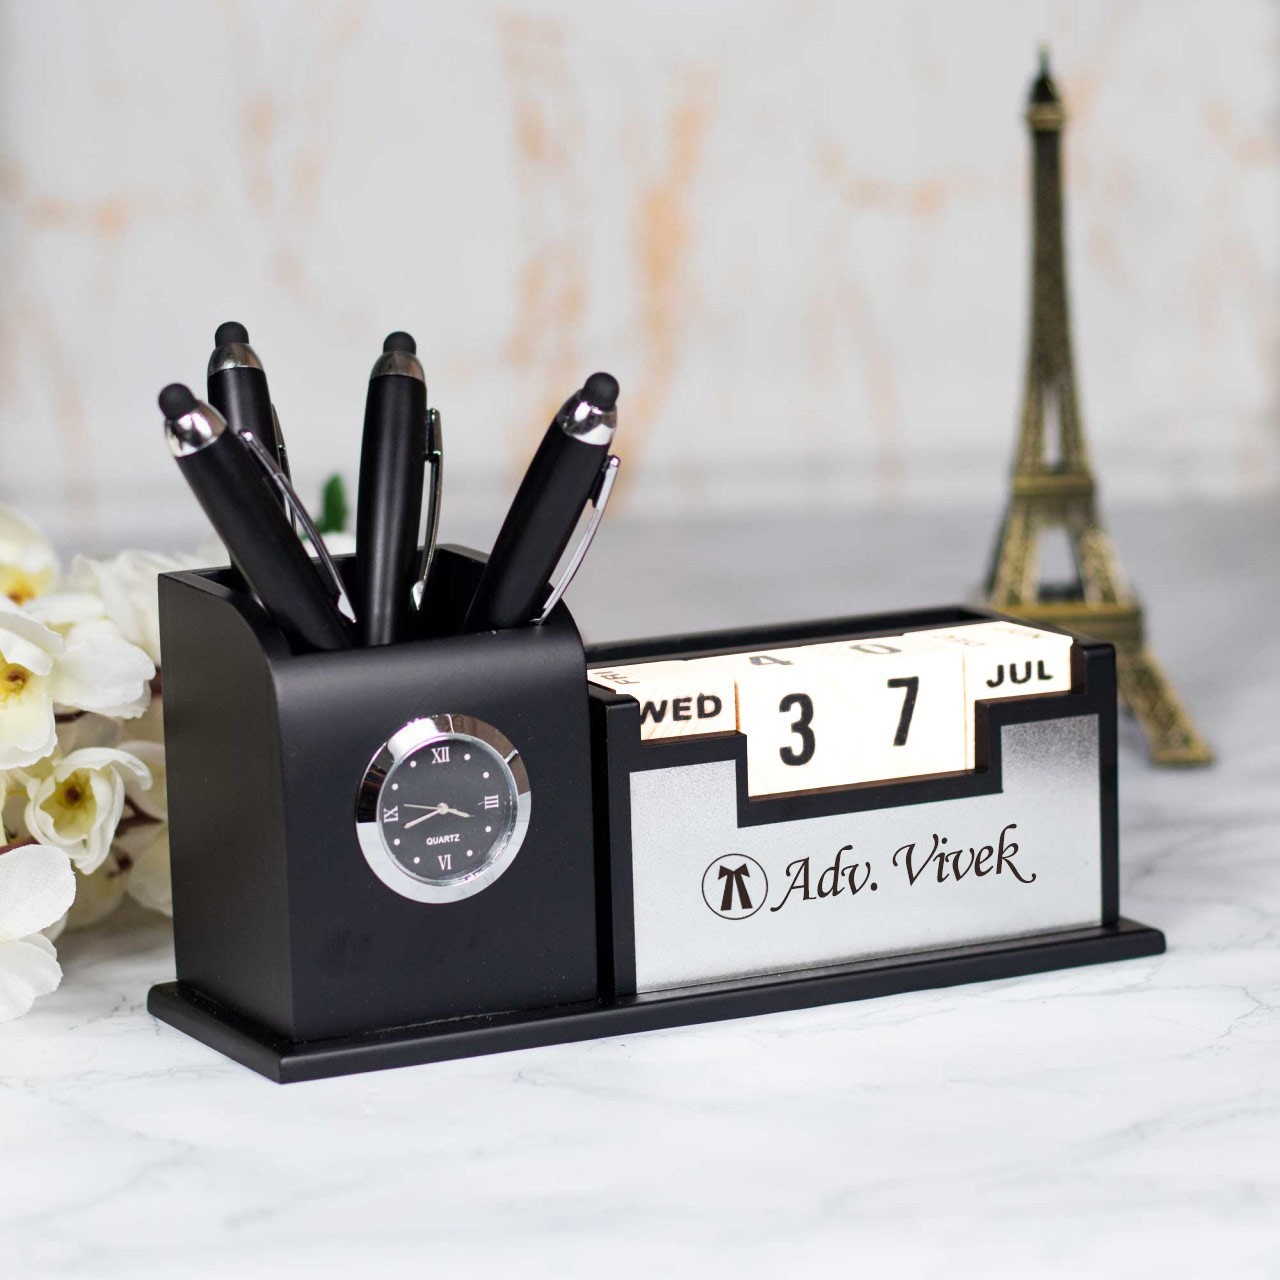 Personalized Table Stand With Calendar & Clock For Advocates